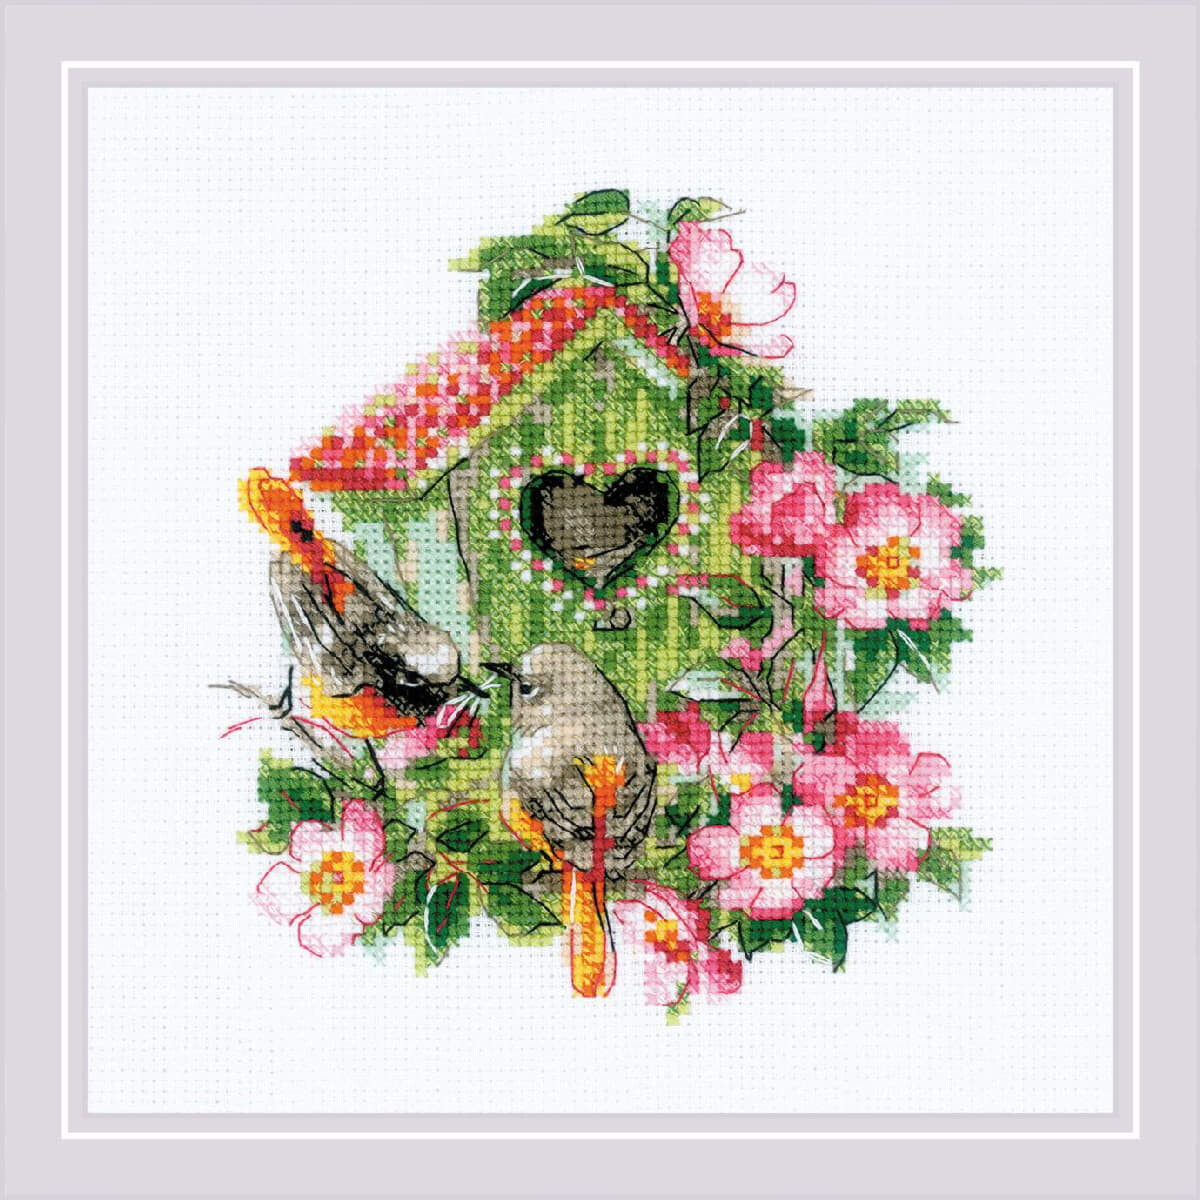 Riolis counted cross stitch kit "Happy...